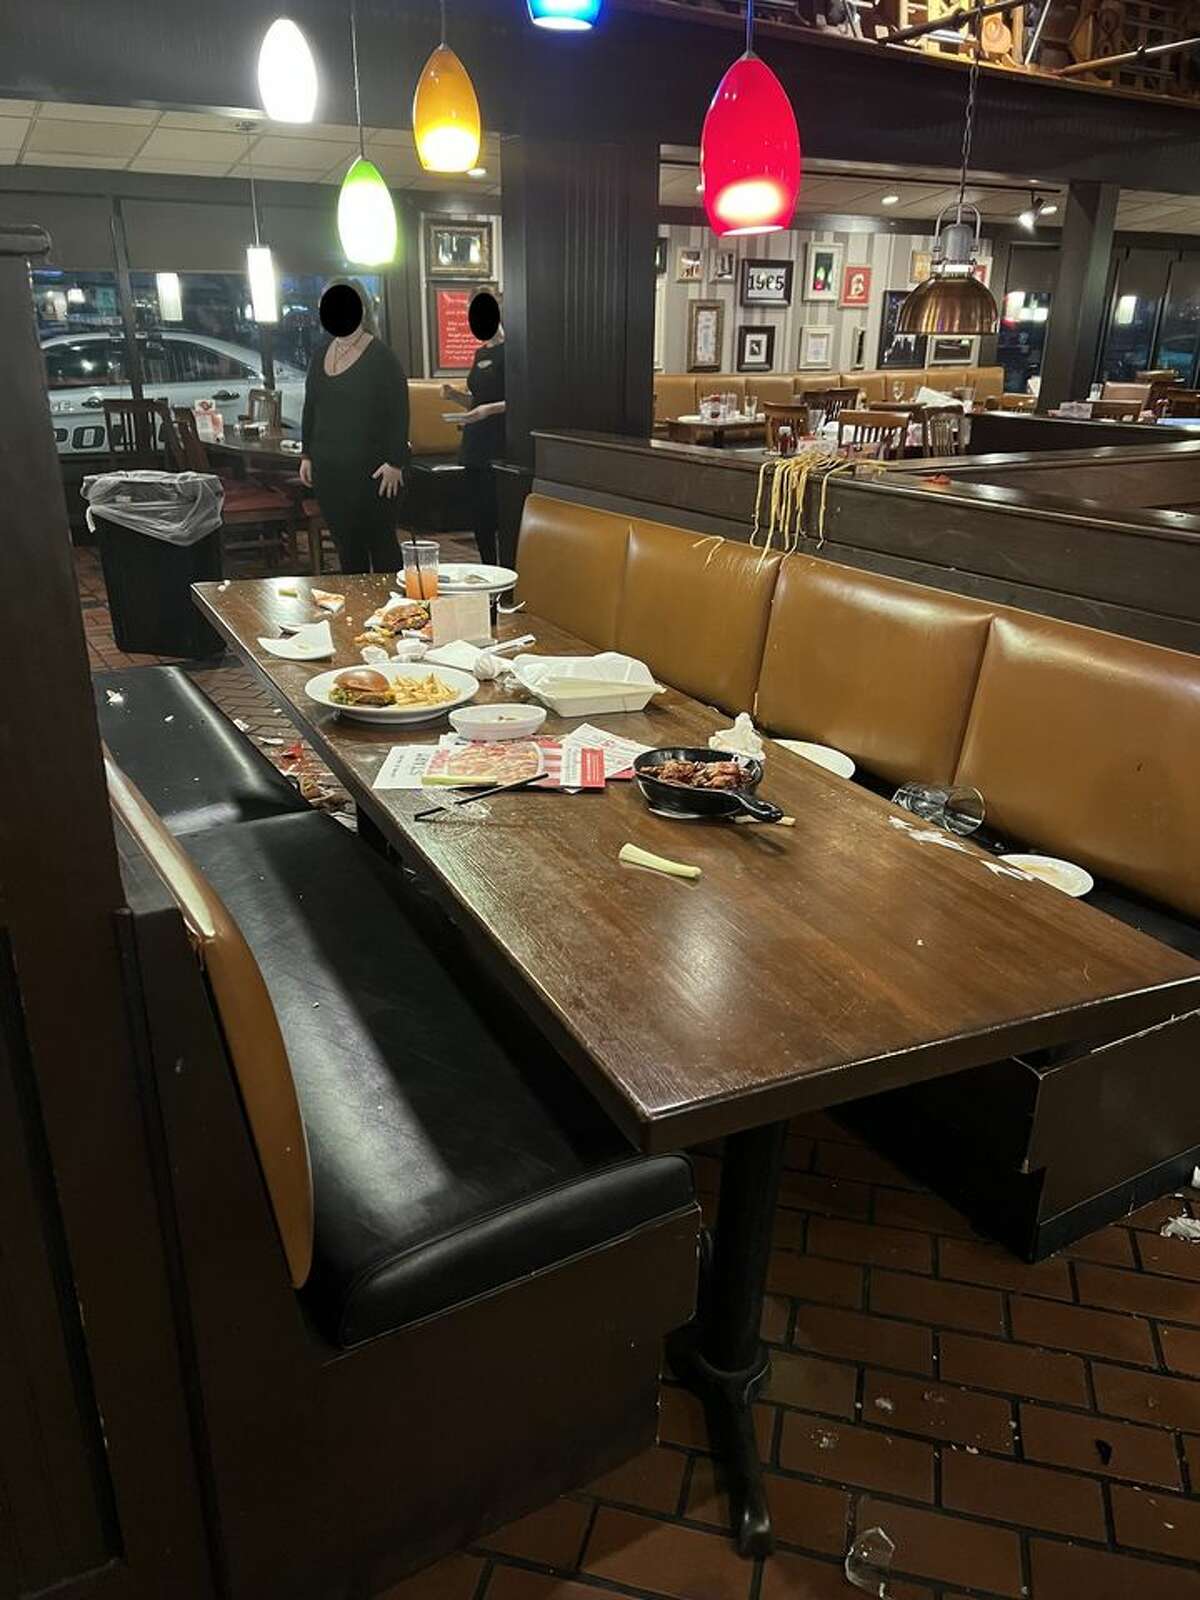 A 30-person brawl at a TGI Fridays restaurant Thursday night left multiple cops injured, according to Orange police.